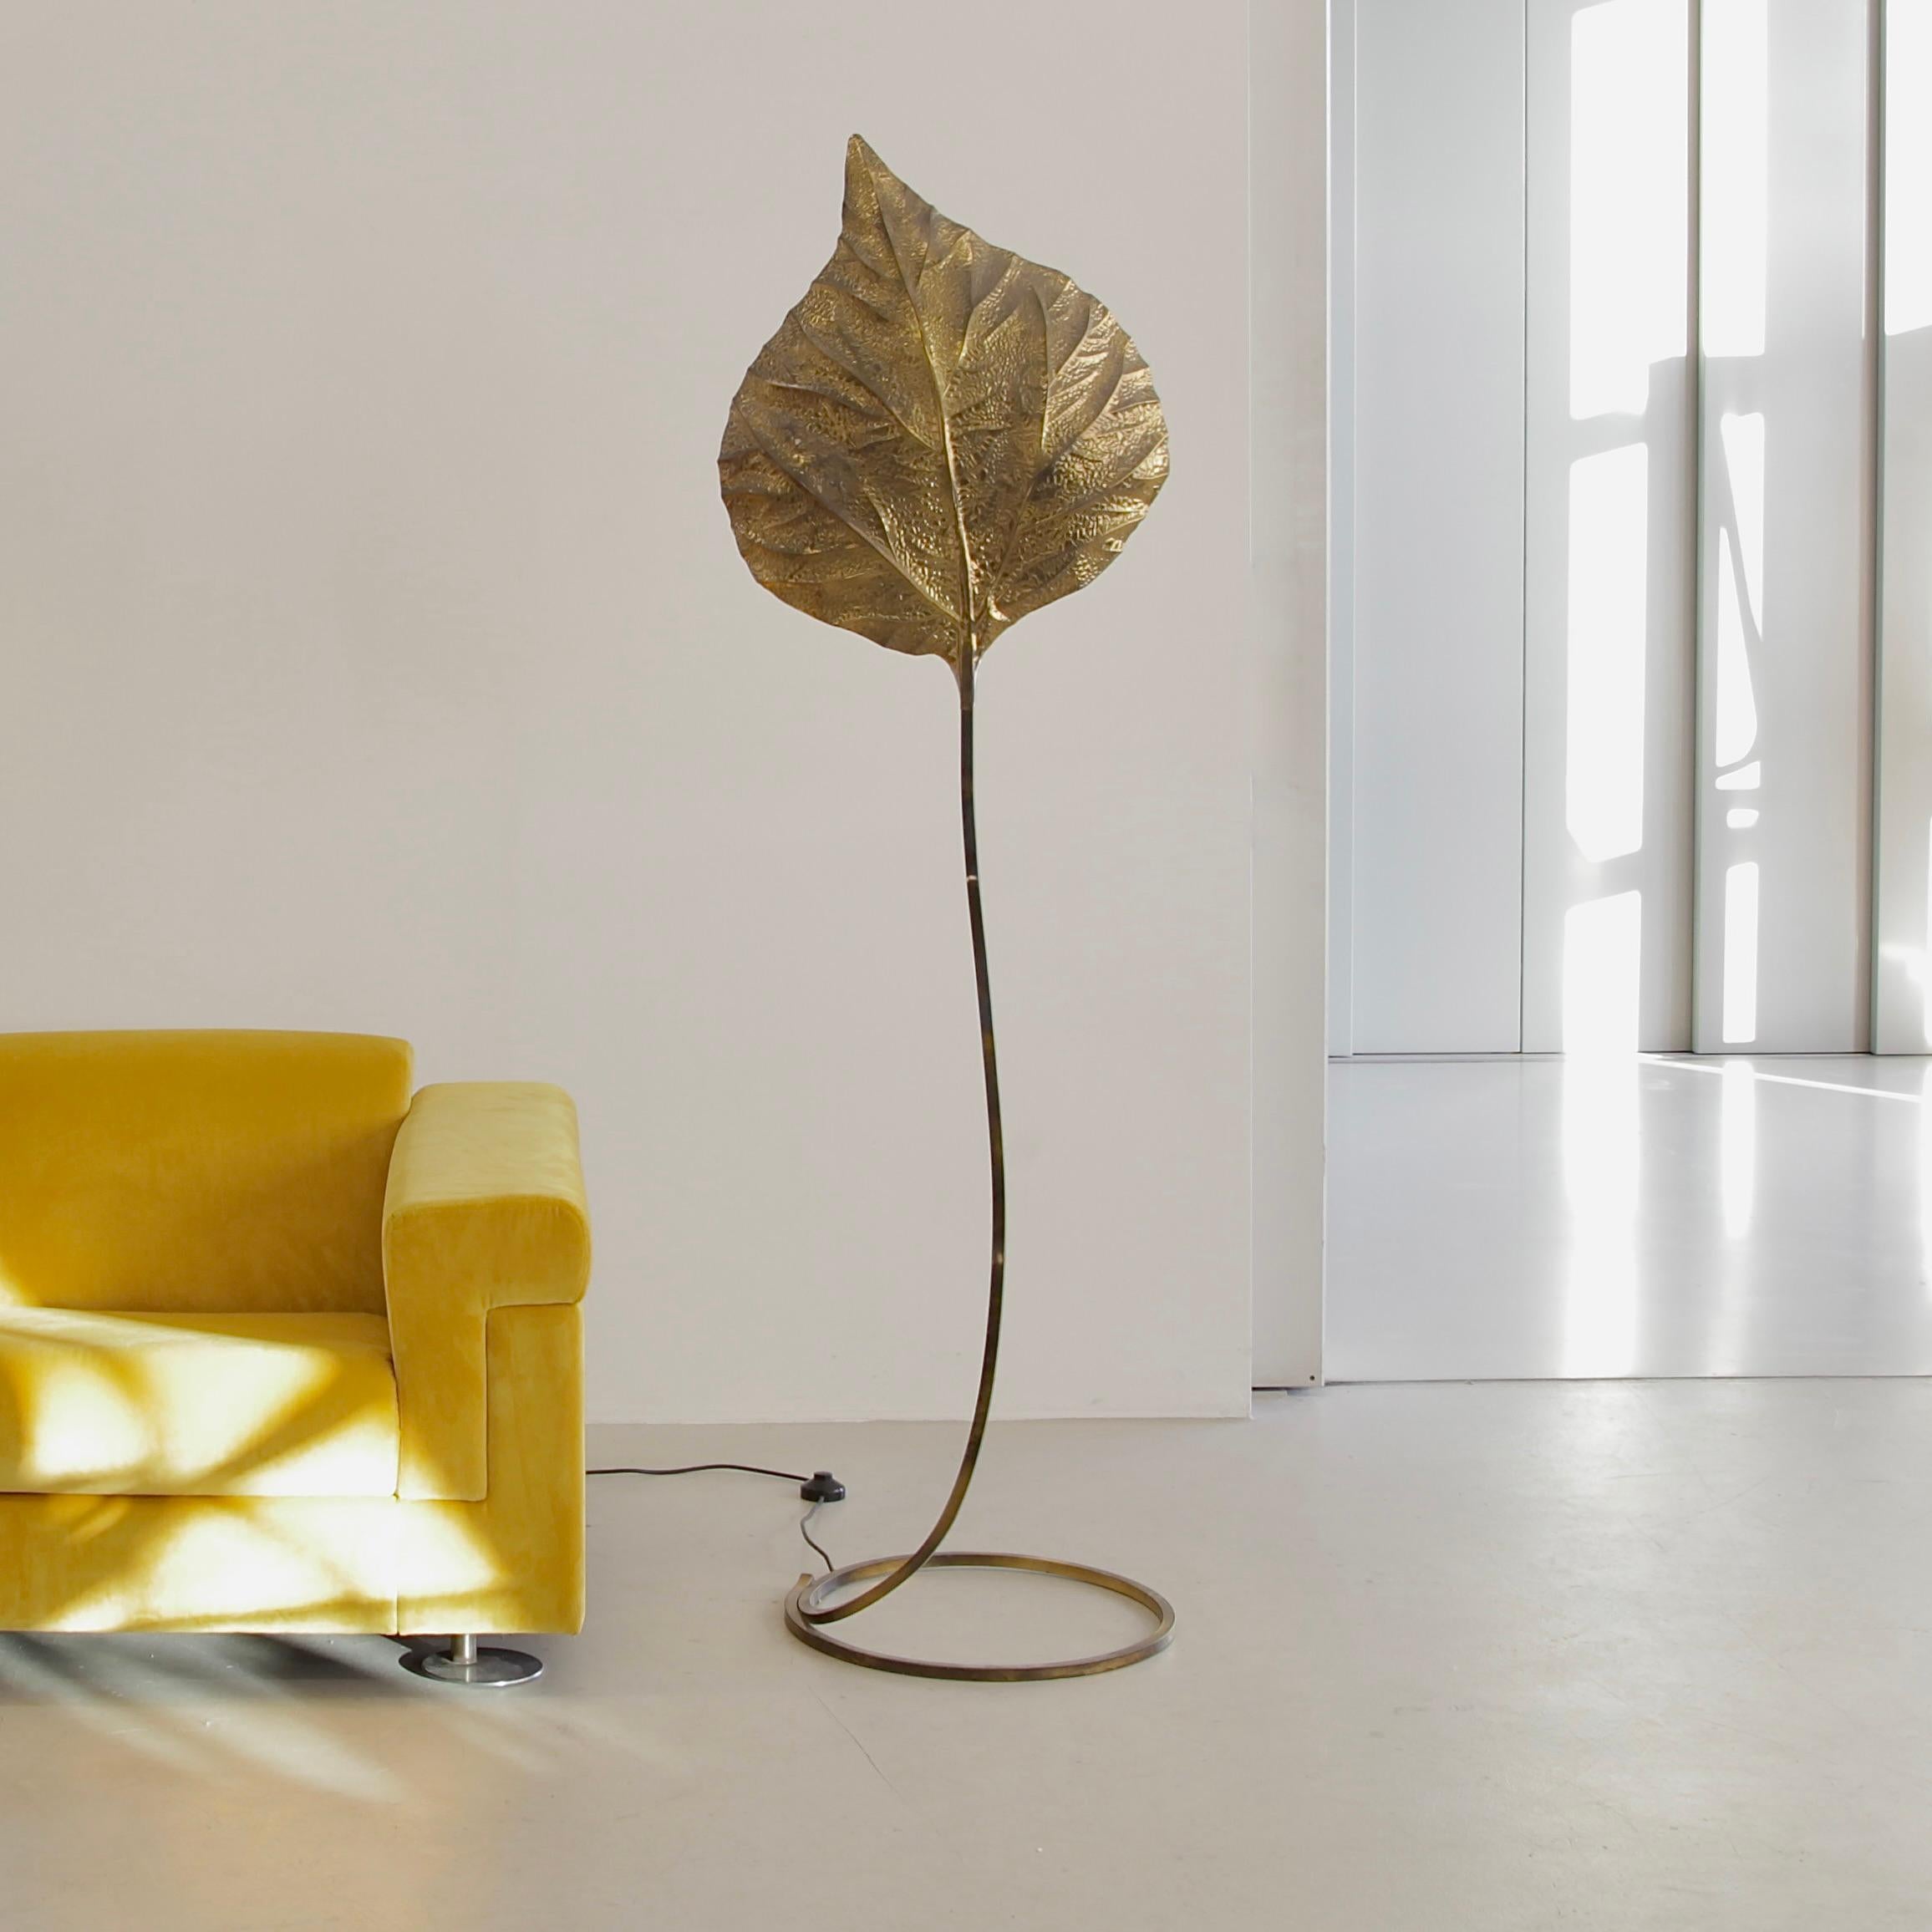 Floor lamp designed by Carlo Giorgi. Italy, Atelier Bottega Gadda, 1970s.

'RABARBARO' floor lamp with one large illuminated leave in hammered brass and organically shaped brass structure. Three E27 light fittings.

Please note: All lighting